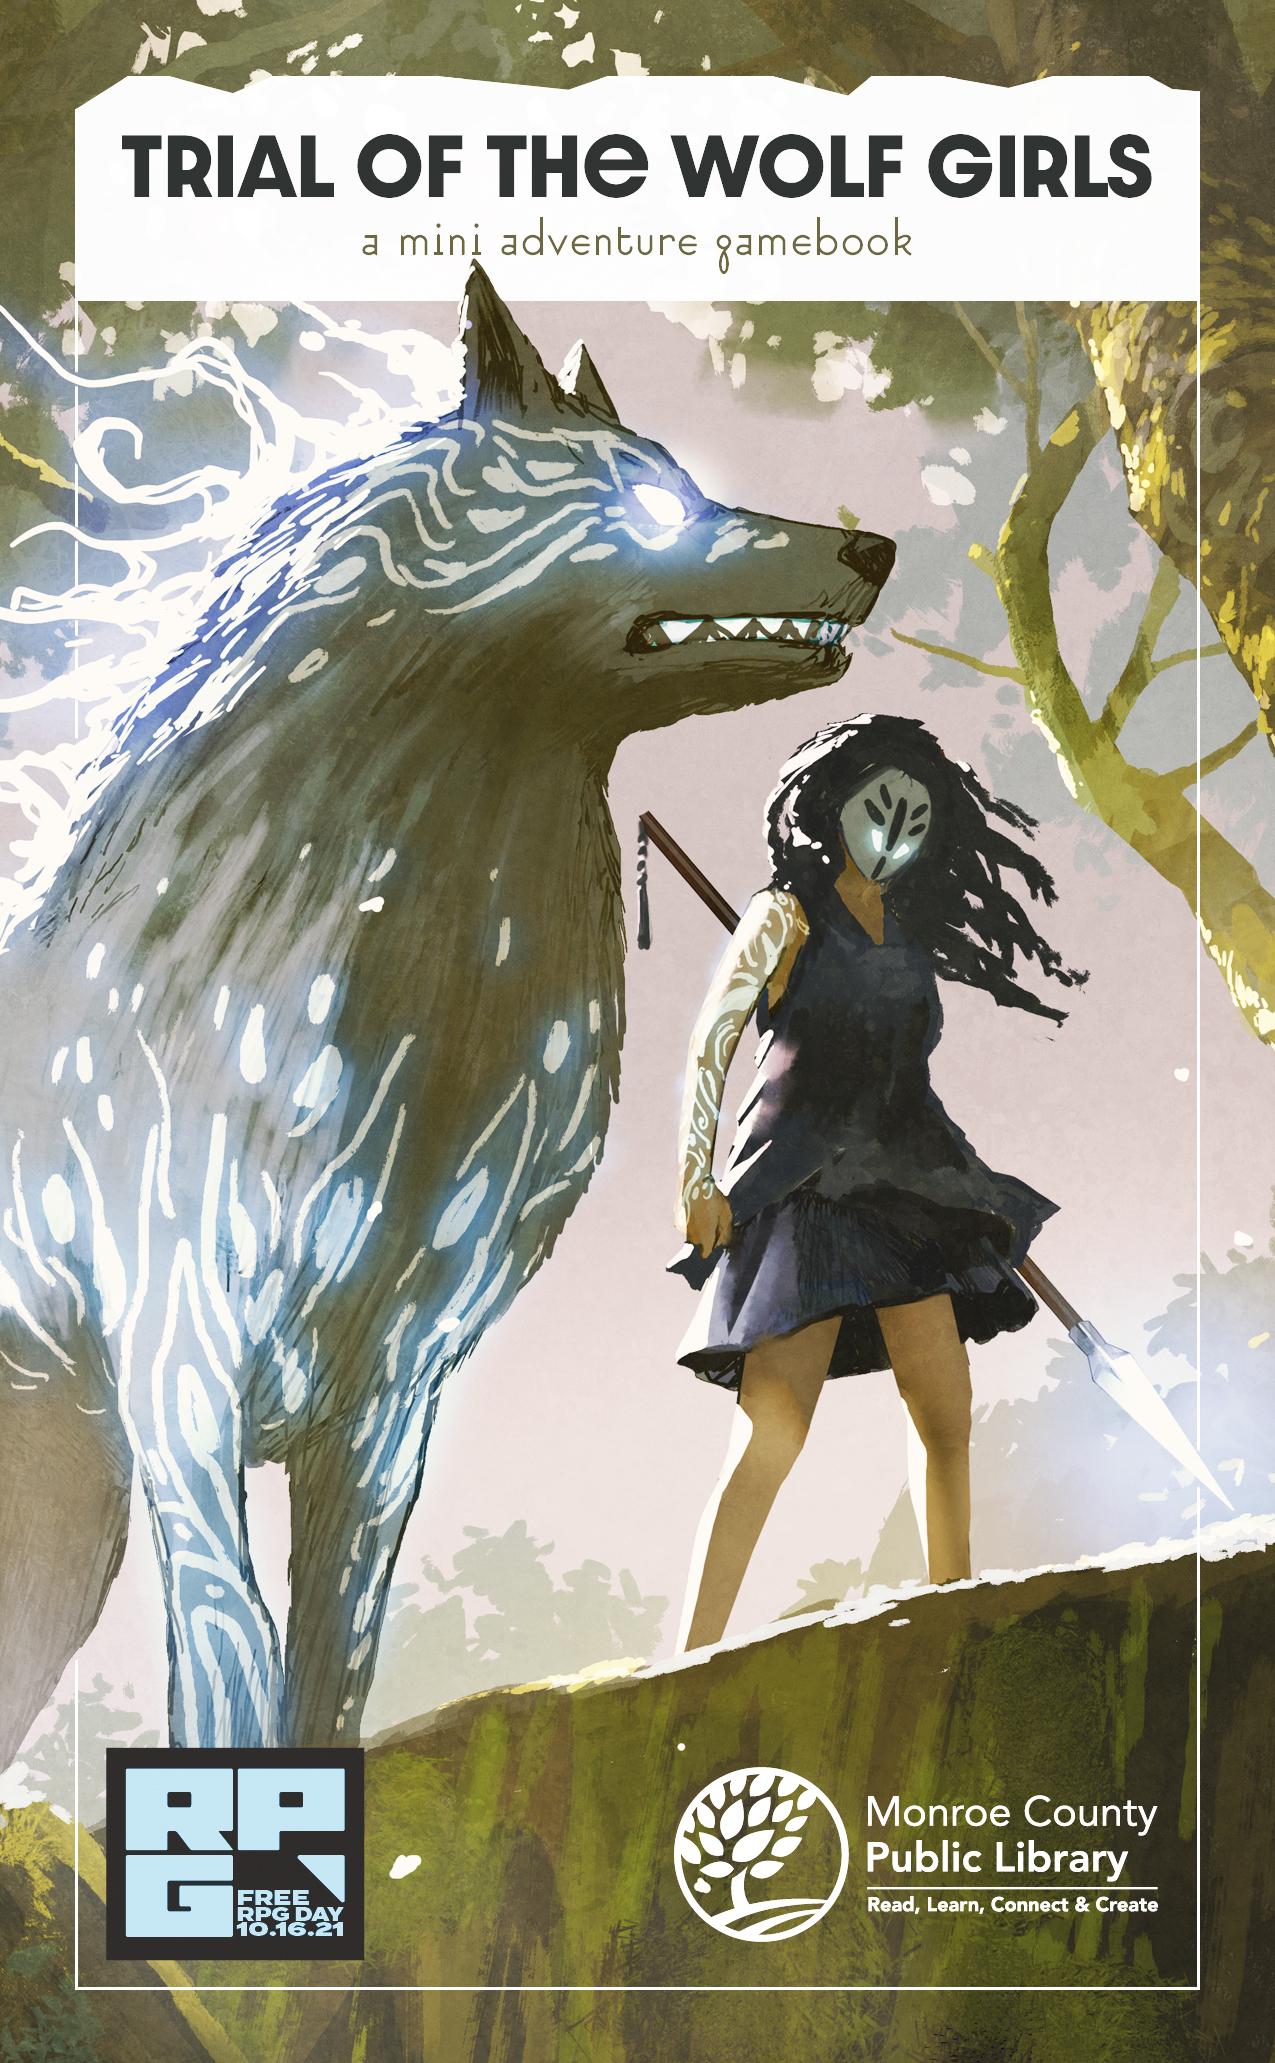 Trial of the Wolf Girls: a mini adventure gamebook